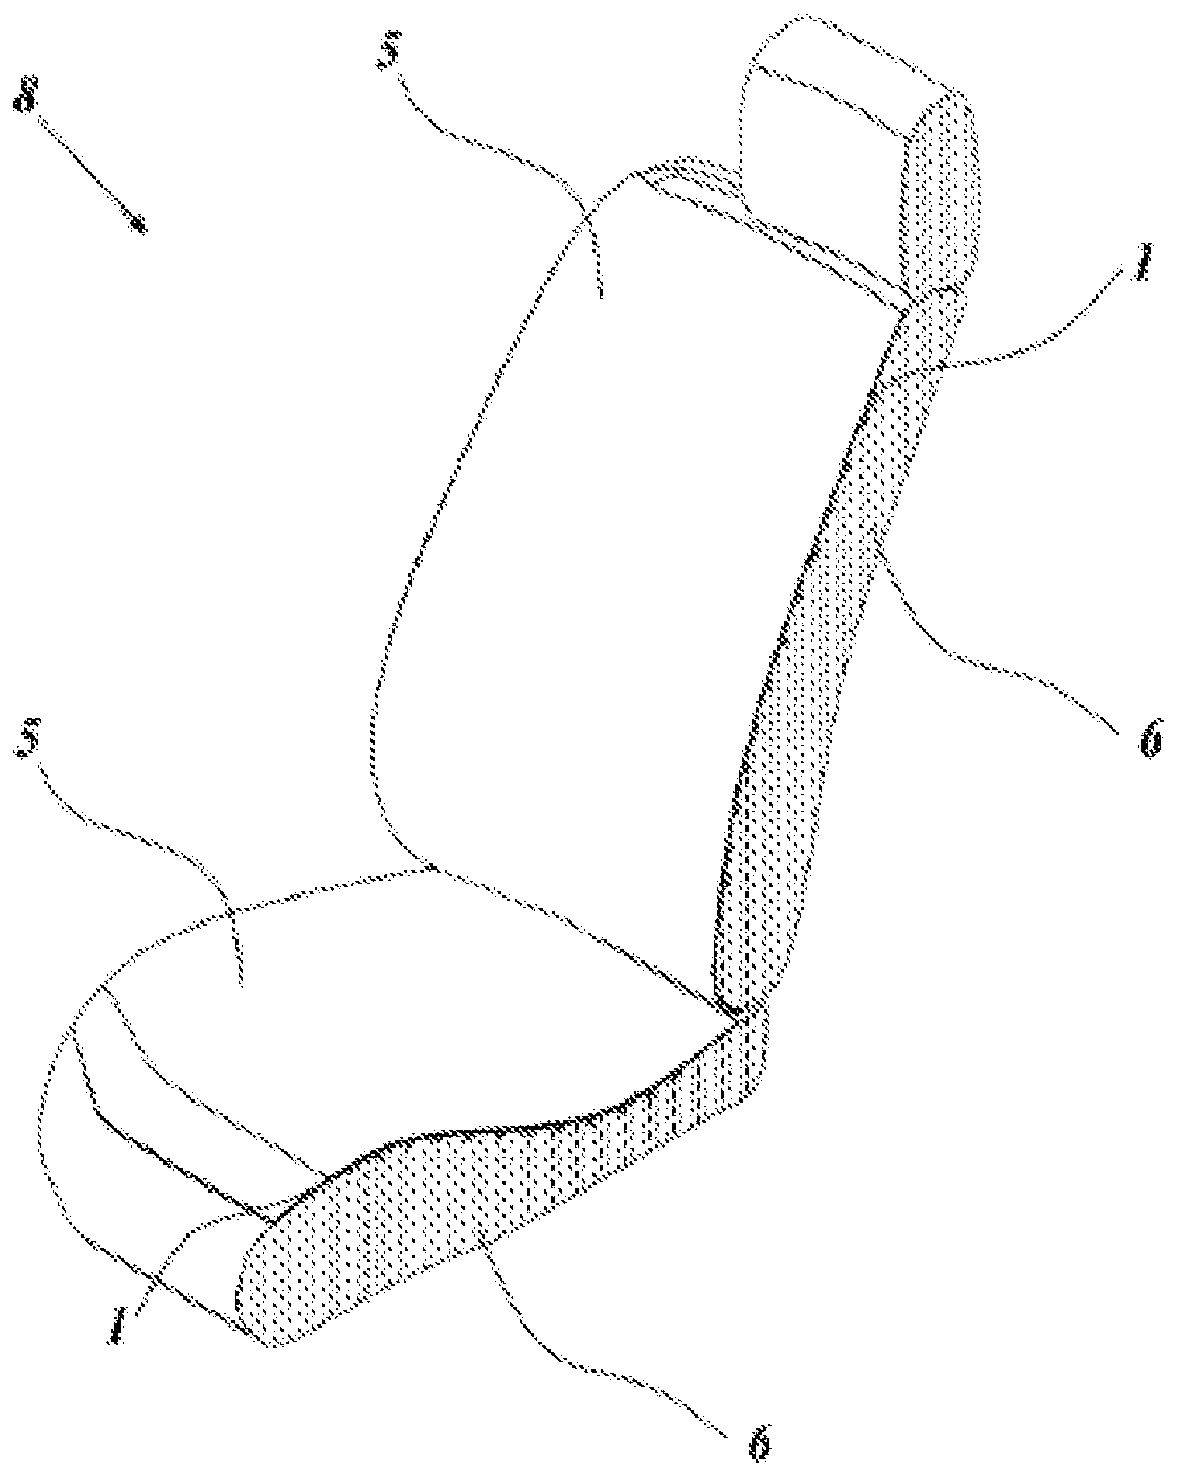 Flexible heat exchanger for thermal control of seating surfaces